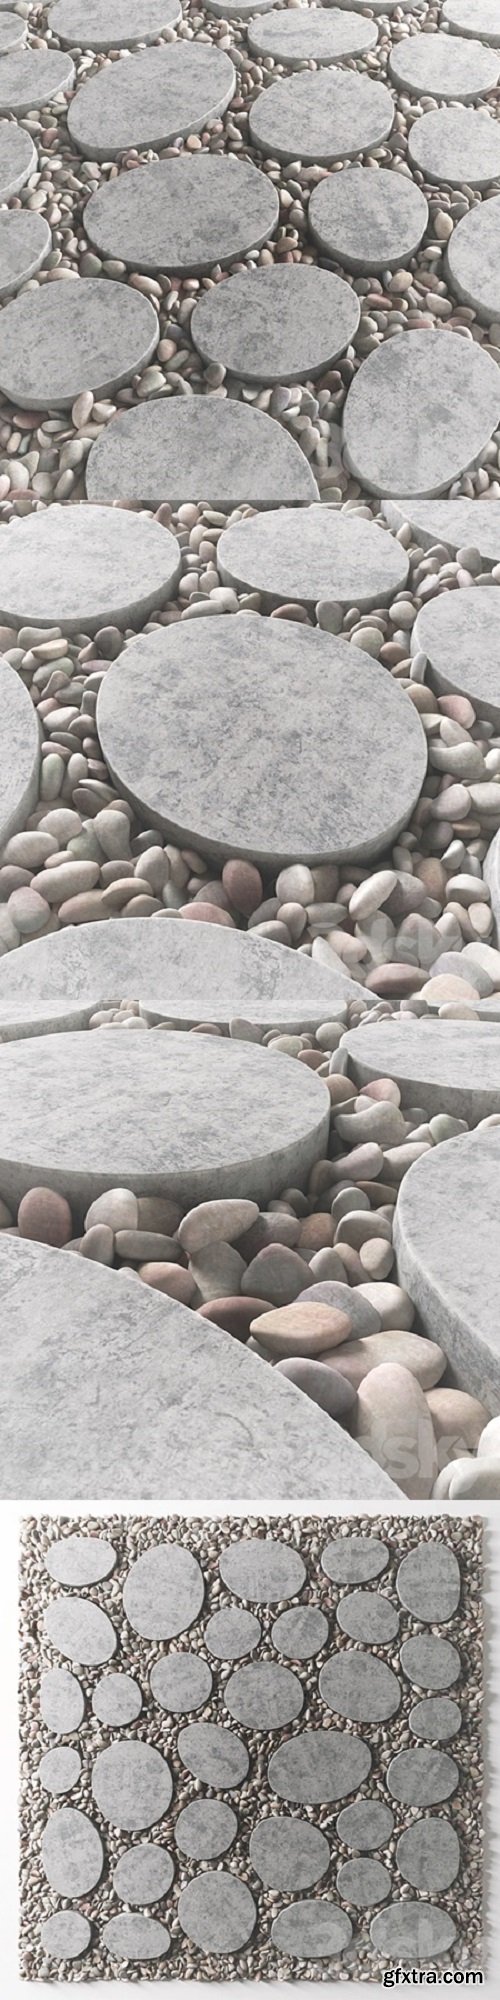 Pro 3DSky - Tile square oval pebble n1 / Square oval slabs with pebbles